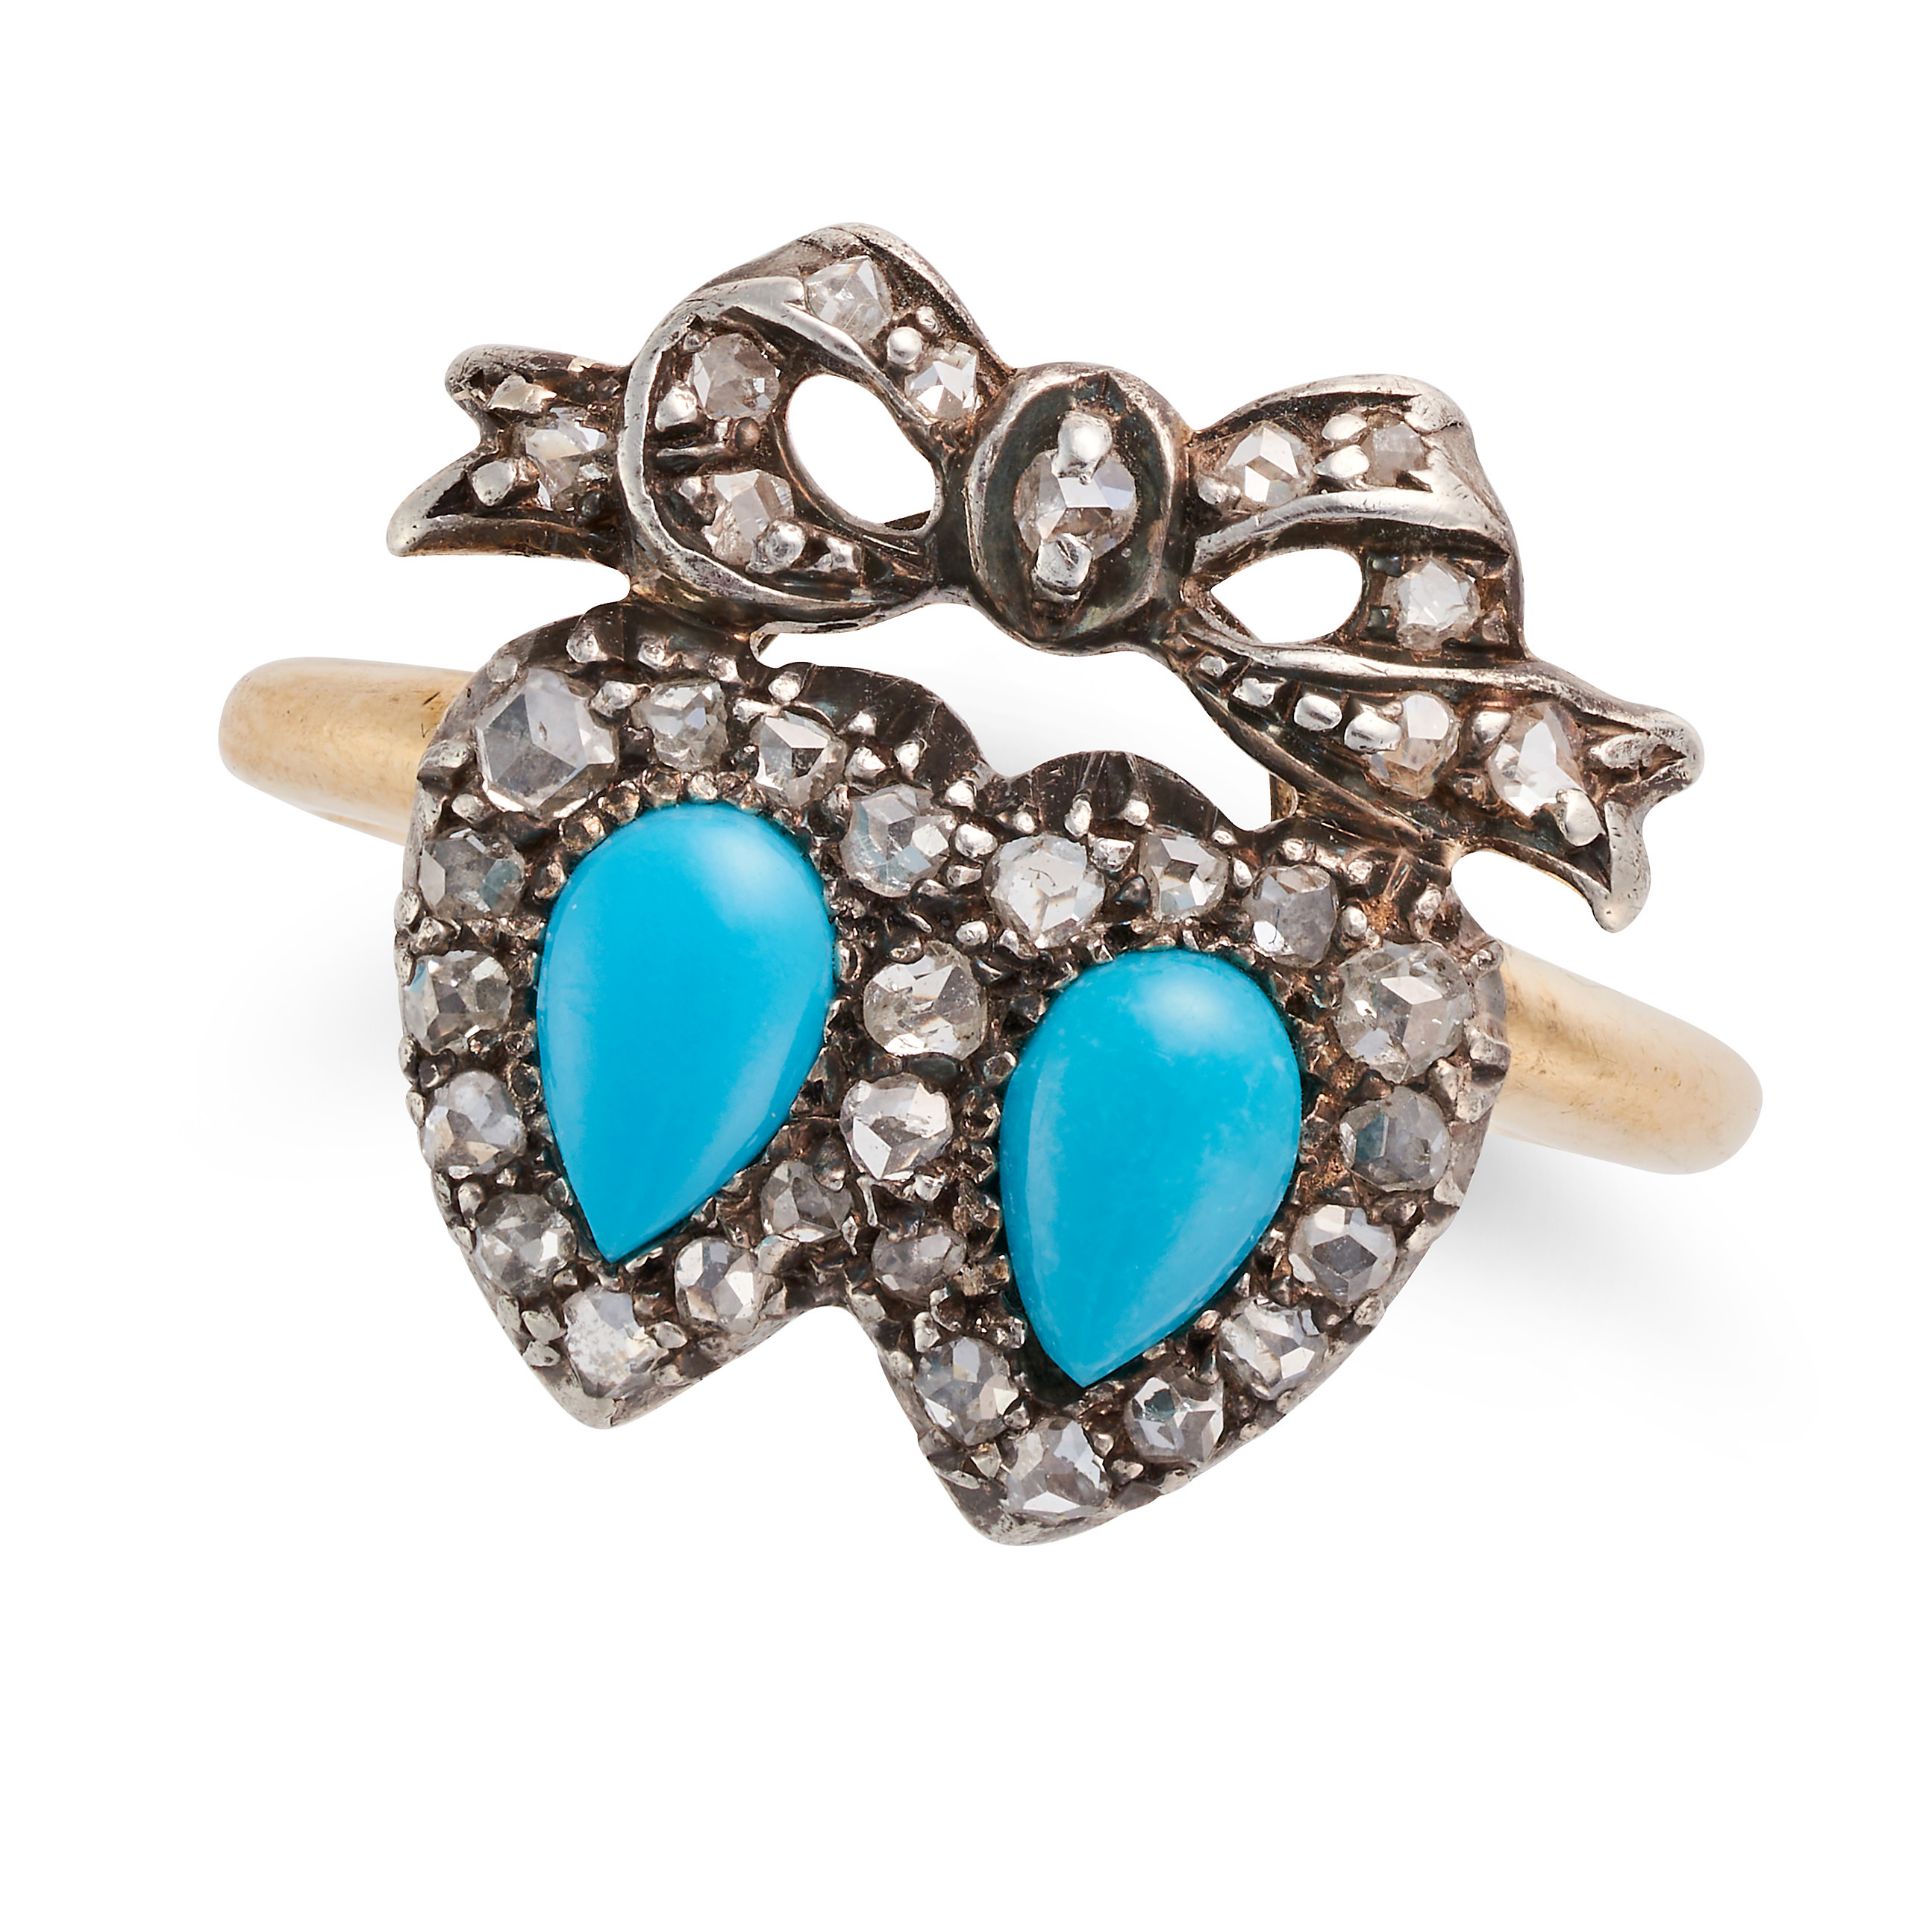 AN ANTIQUE TURQUOISE AND DIAMOND SWEETHEART RING in yellow gold and silver, designed as two inter...